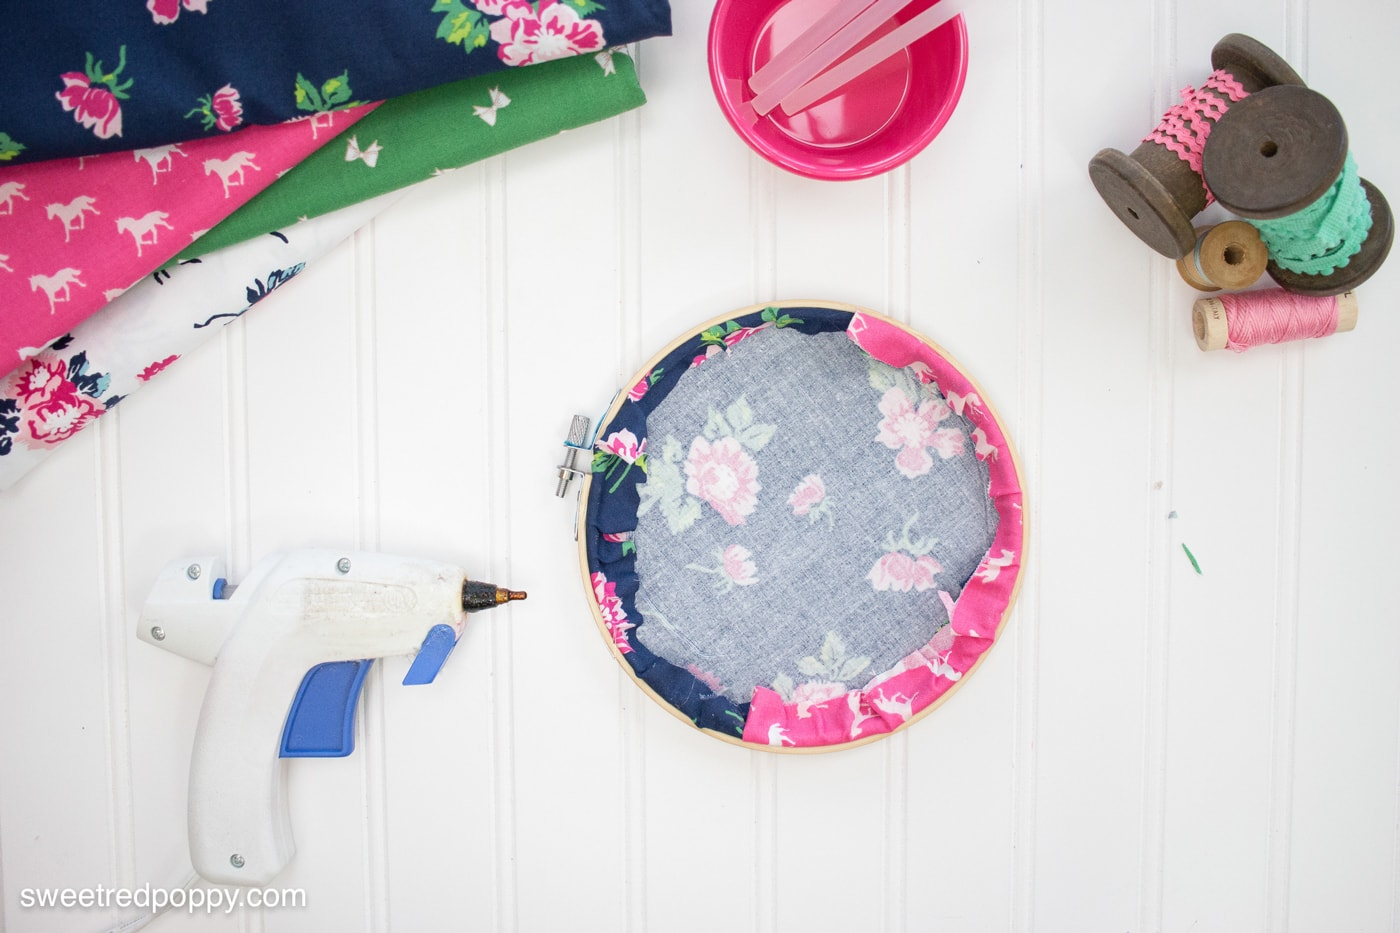 How To Make An Embroidery Pattern Diy Embroidery Hoop Hanging Wall Organizers